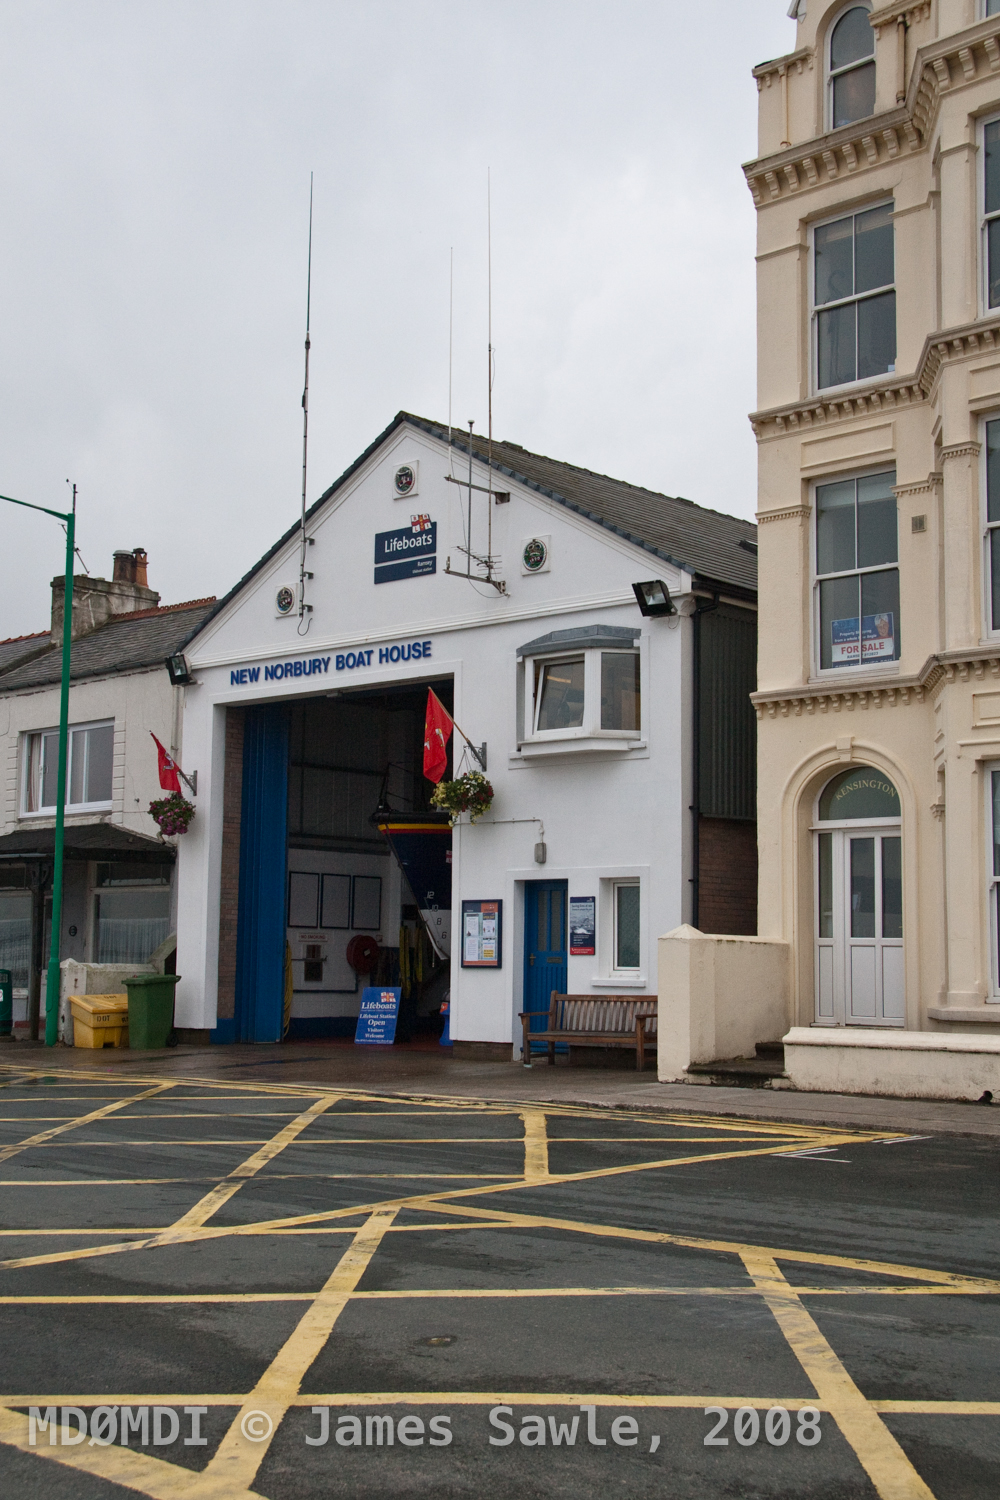 The Ramsey RNLI Lifeboat Station on the Isle of Man